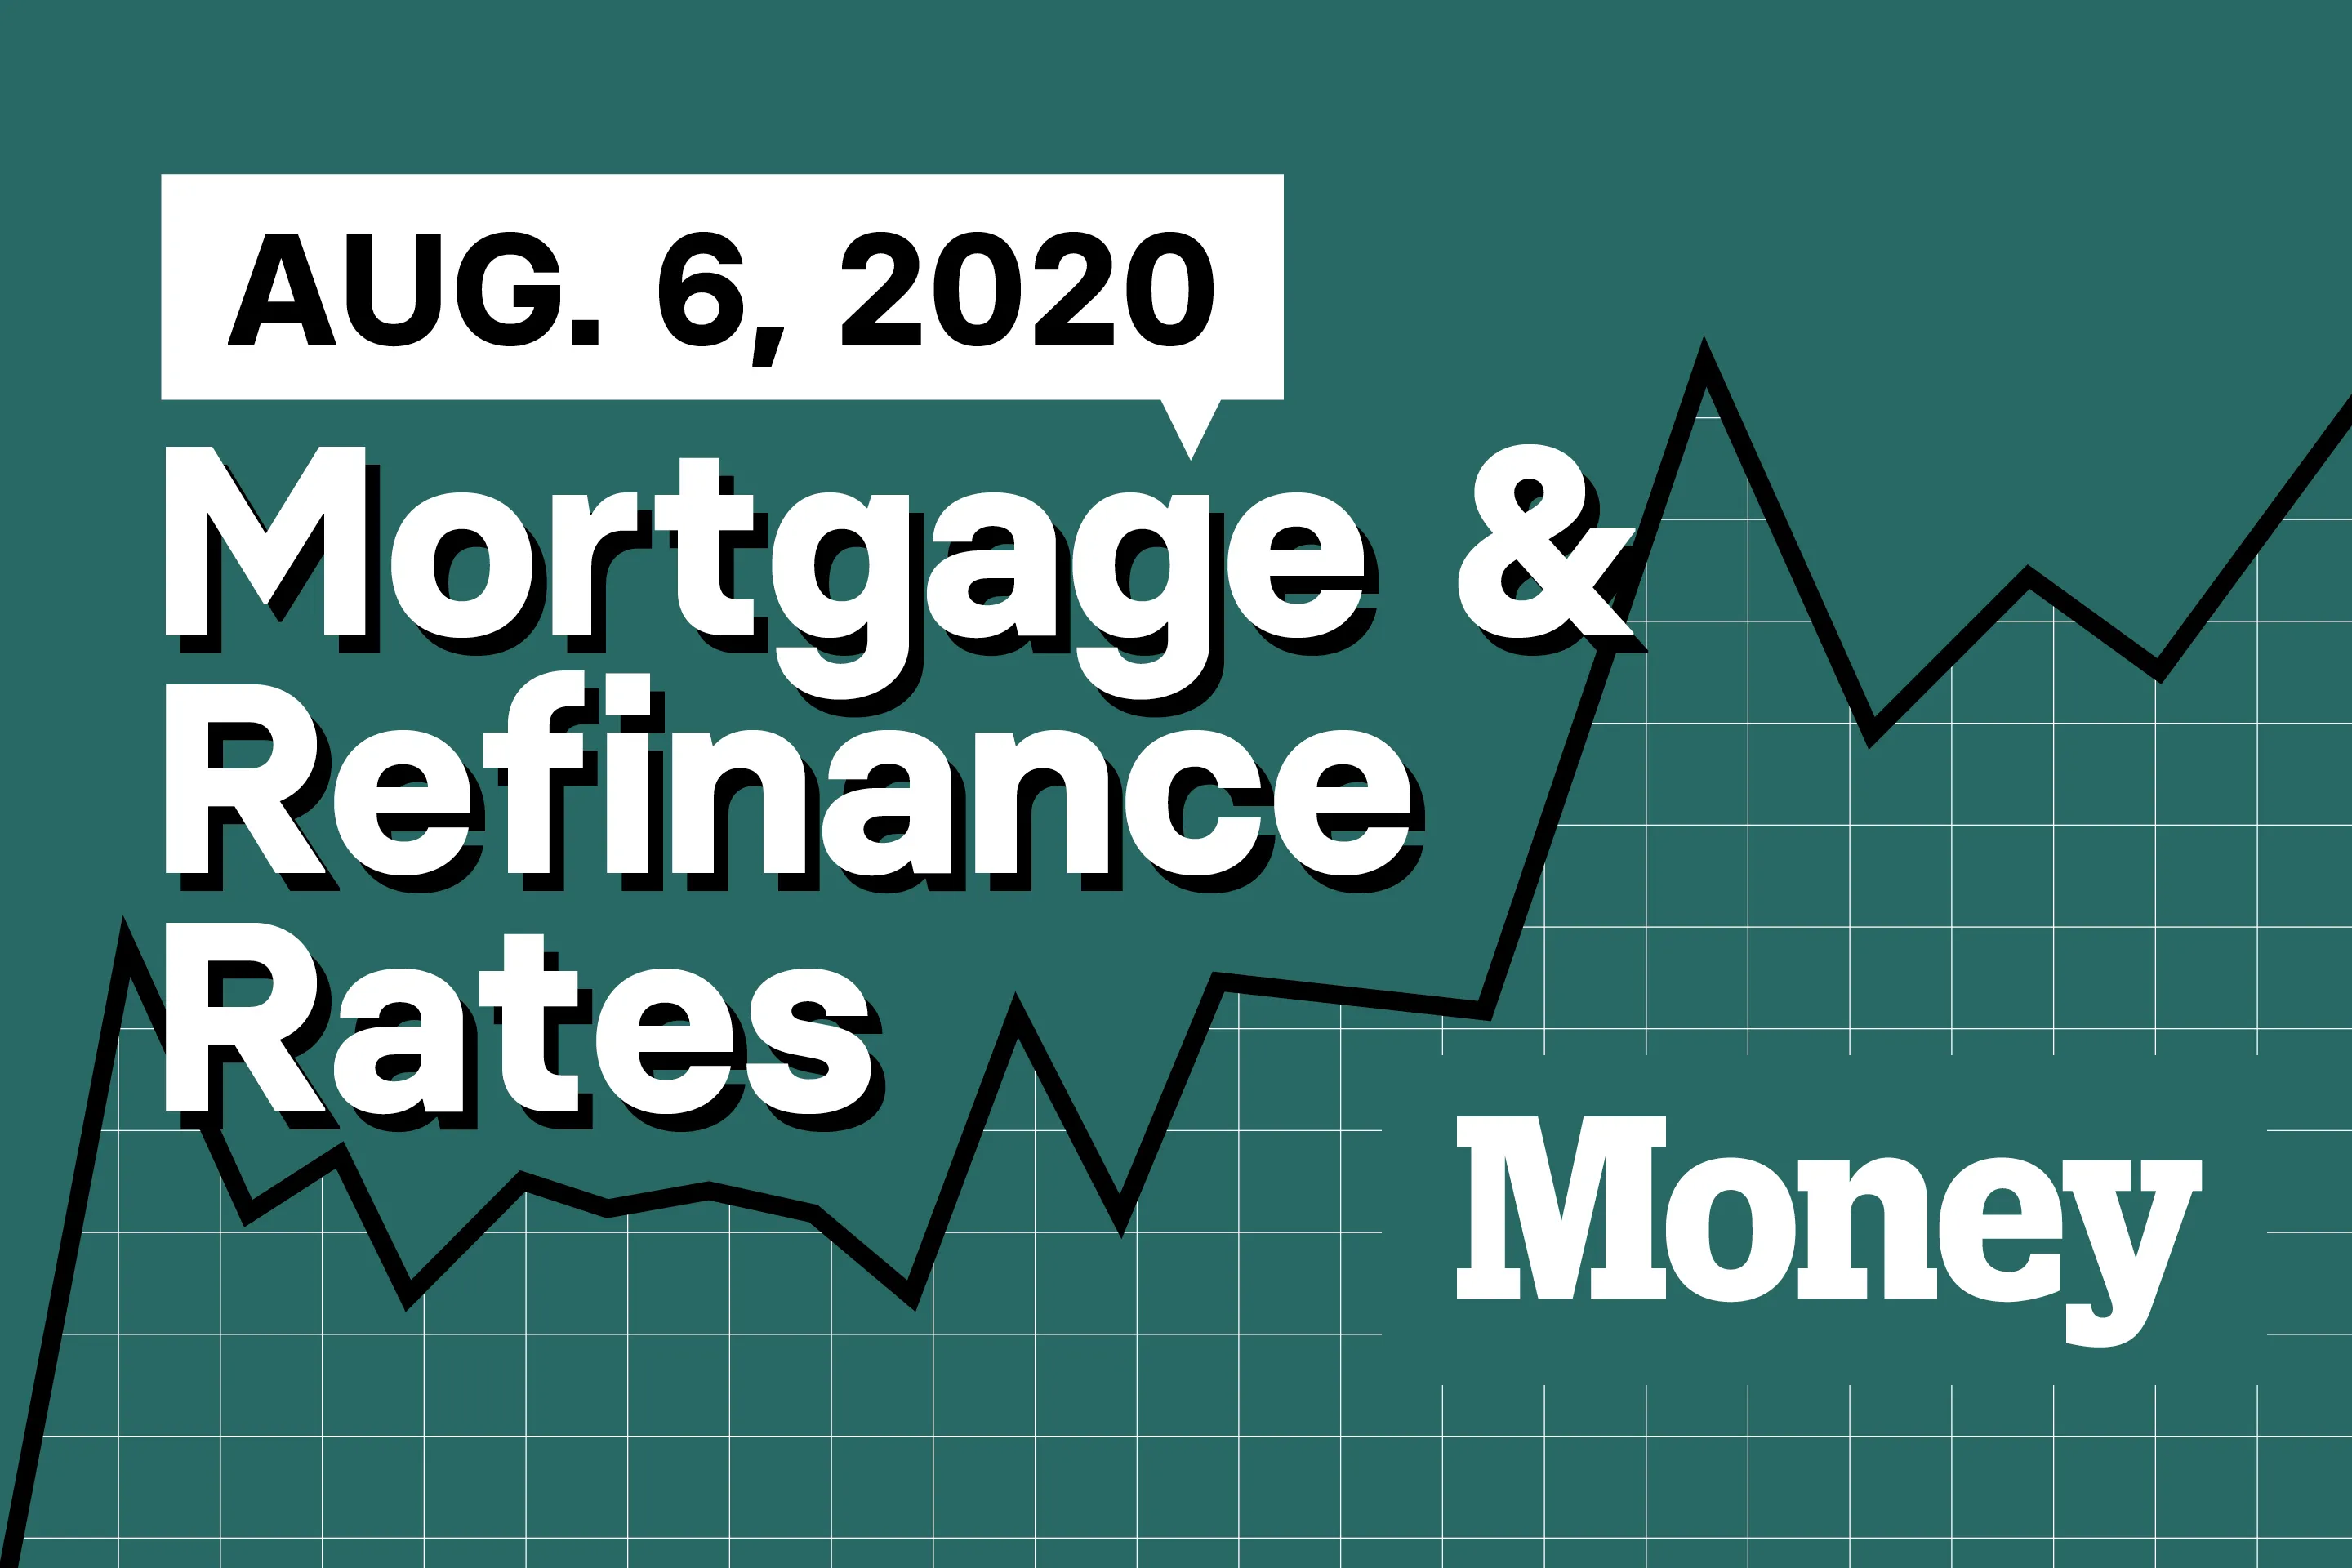 Here Are Today's Best Mortgage & Refinance Rates for August 6, 2020